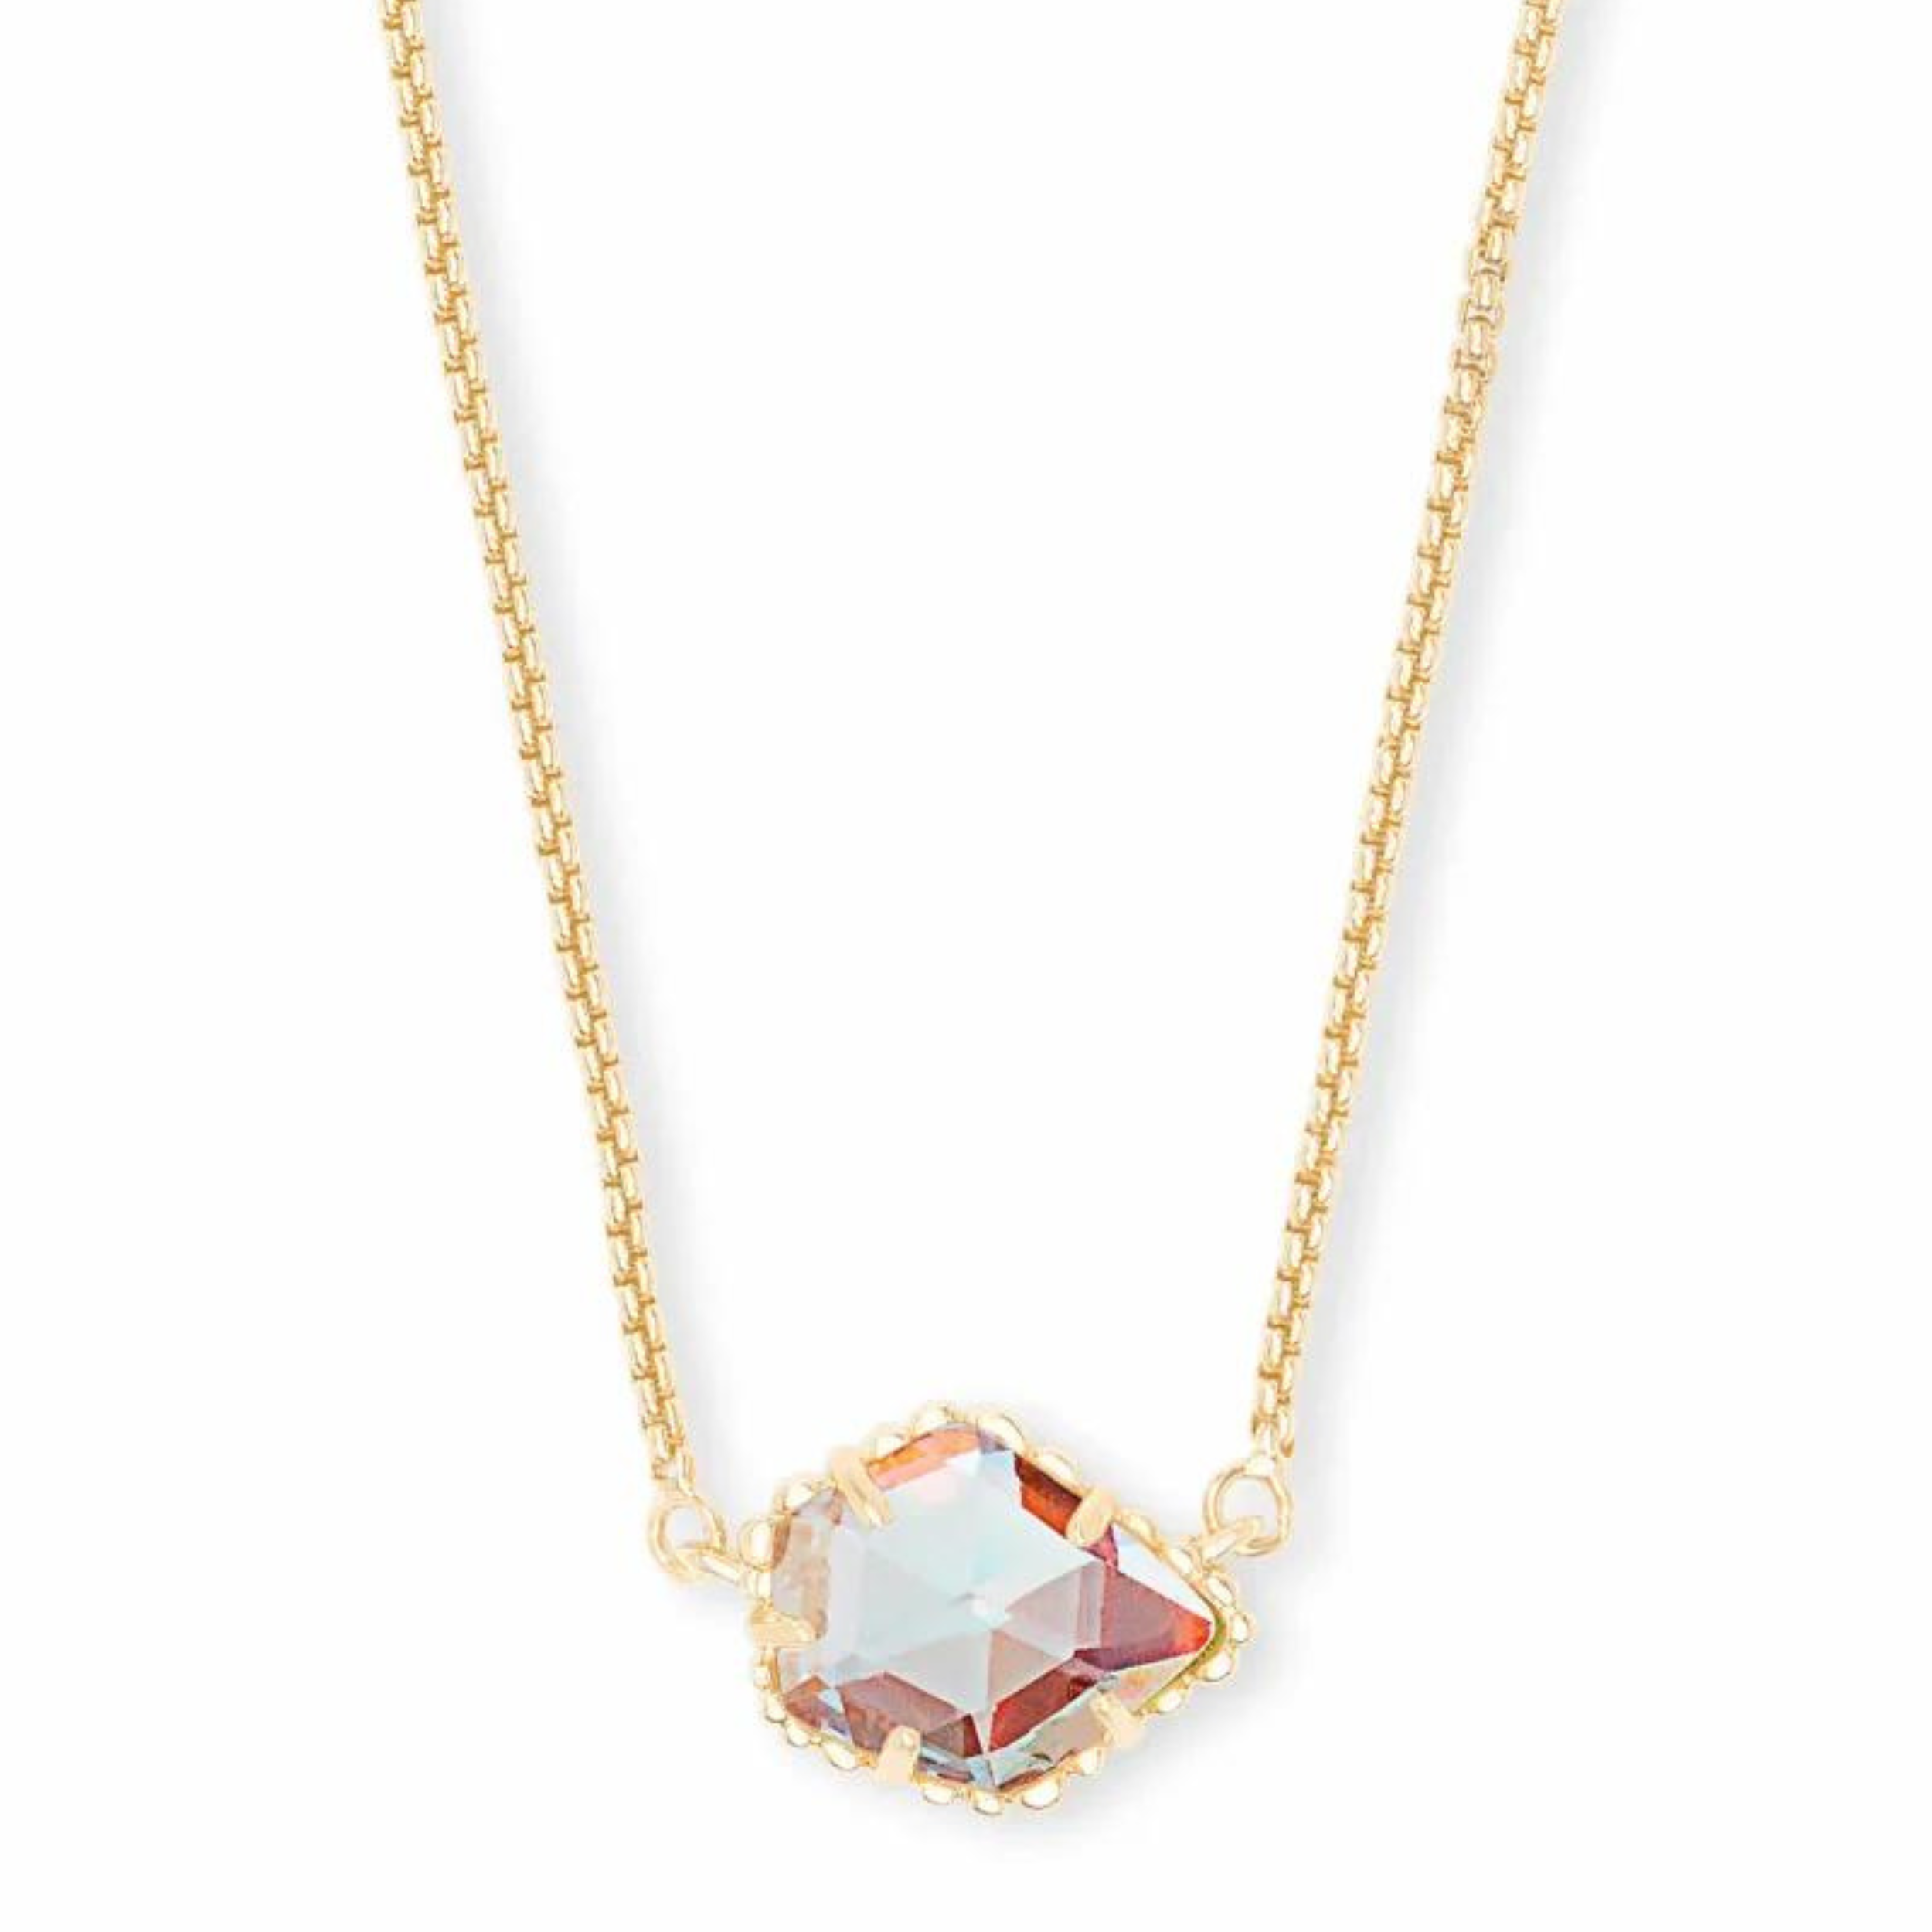 Gold necklace with dichroic glass pendant, pictured on a white background.